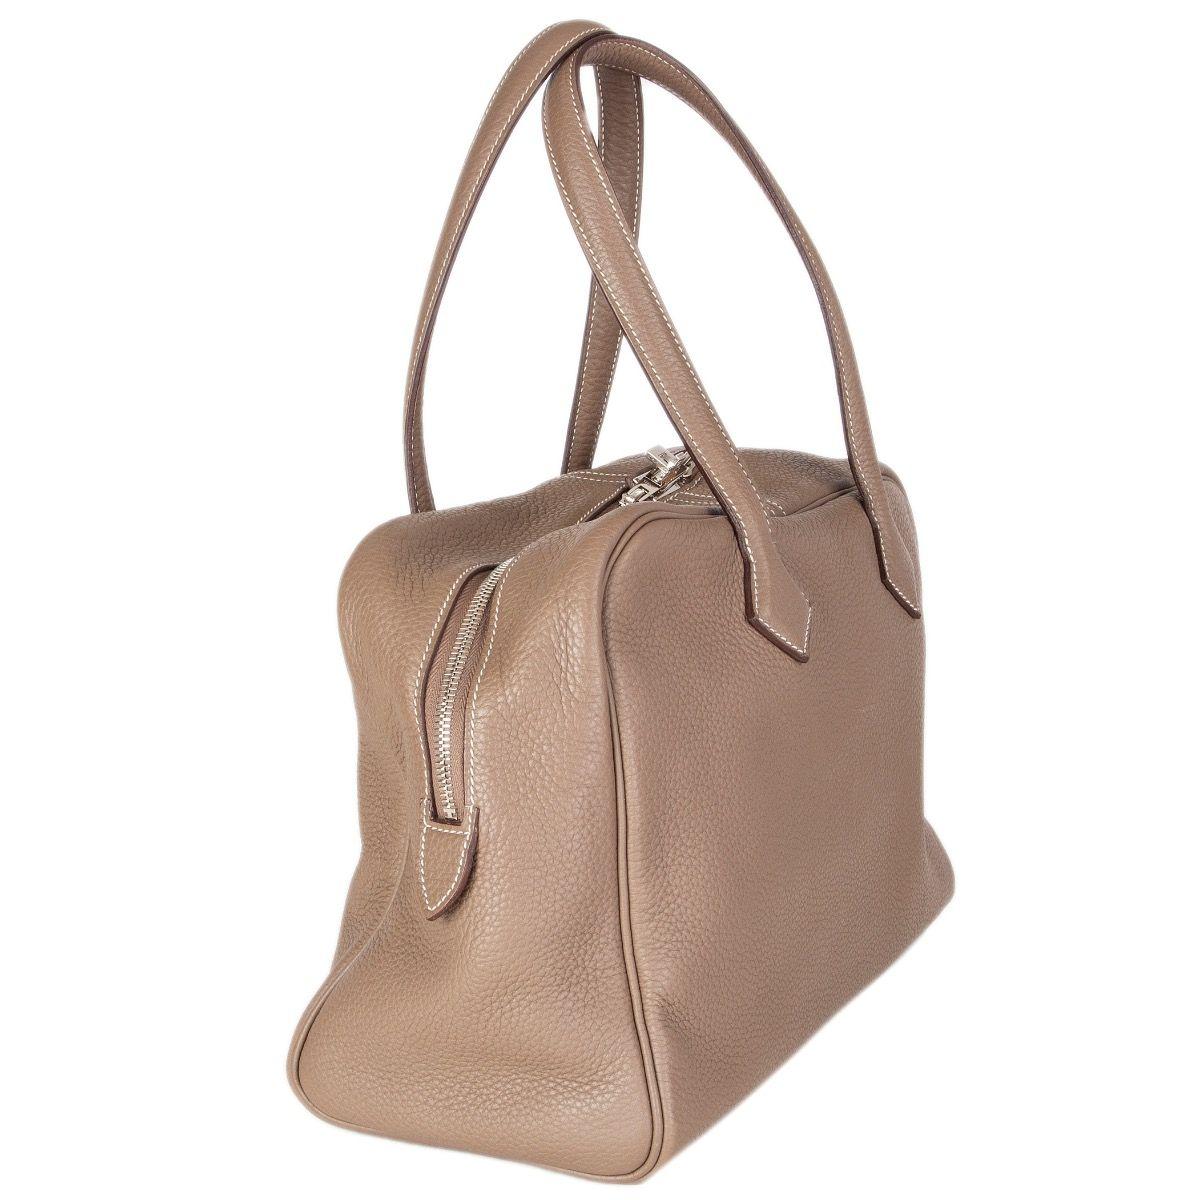 Hermes 'Victoria II Fourre-Tout 35' shoulder bag in Etoupe (taupe) Taurillon Clemence leather with contrasting white stitching. Closes with a two-way zipper on top. Lined in herringbone canvas with an open pocket against the front and two open